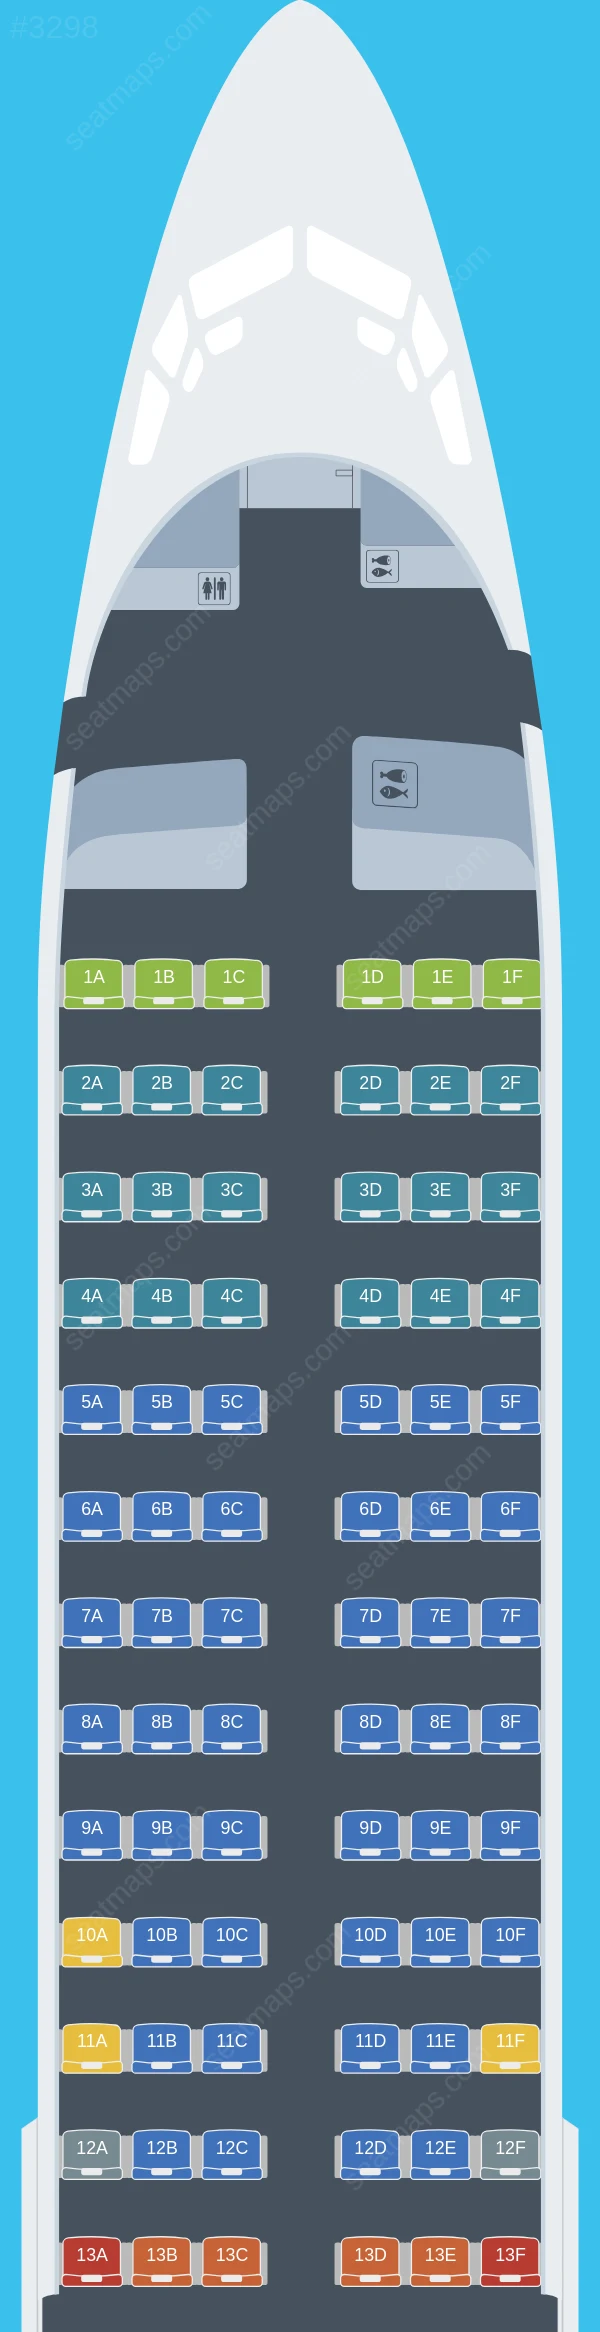 Luxair Boeing 737-800 seatmap preview